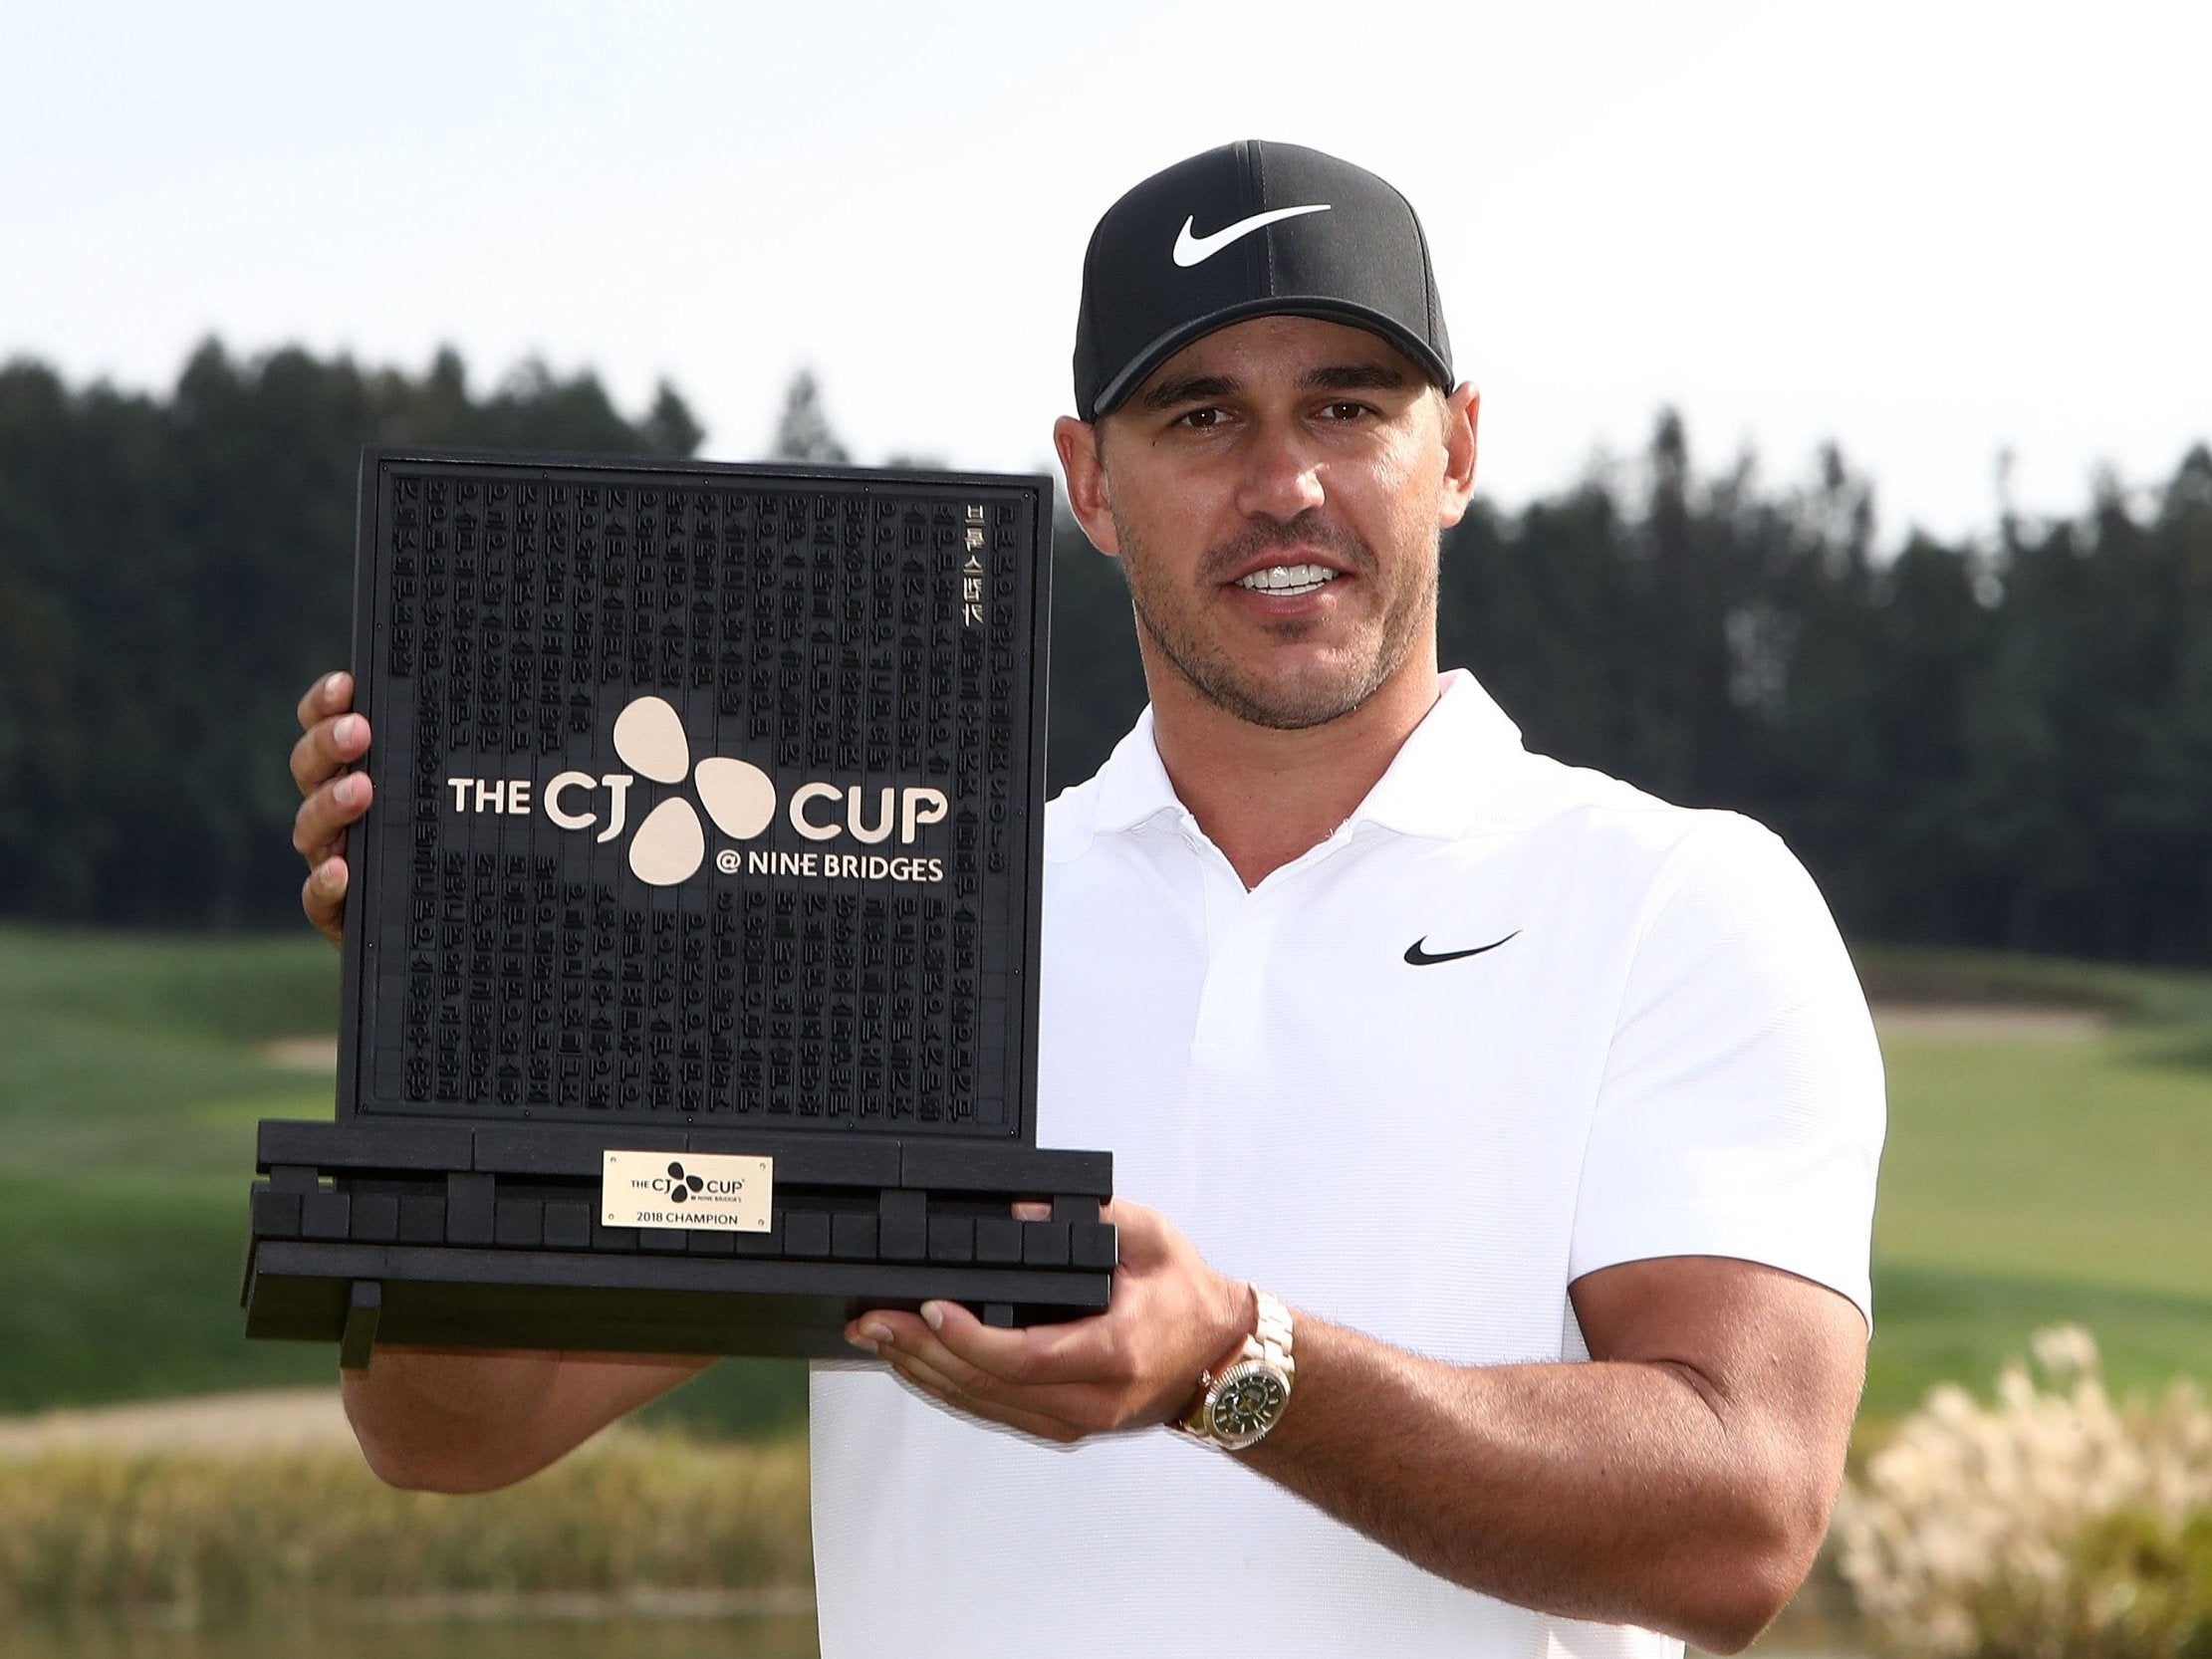 Brooks Koepka set to become new world number one after CJ Cup win The Independent The Independent